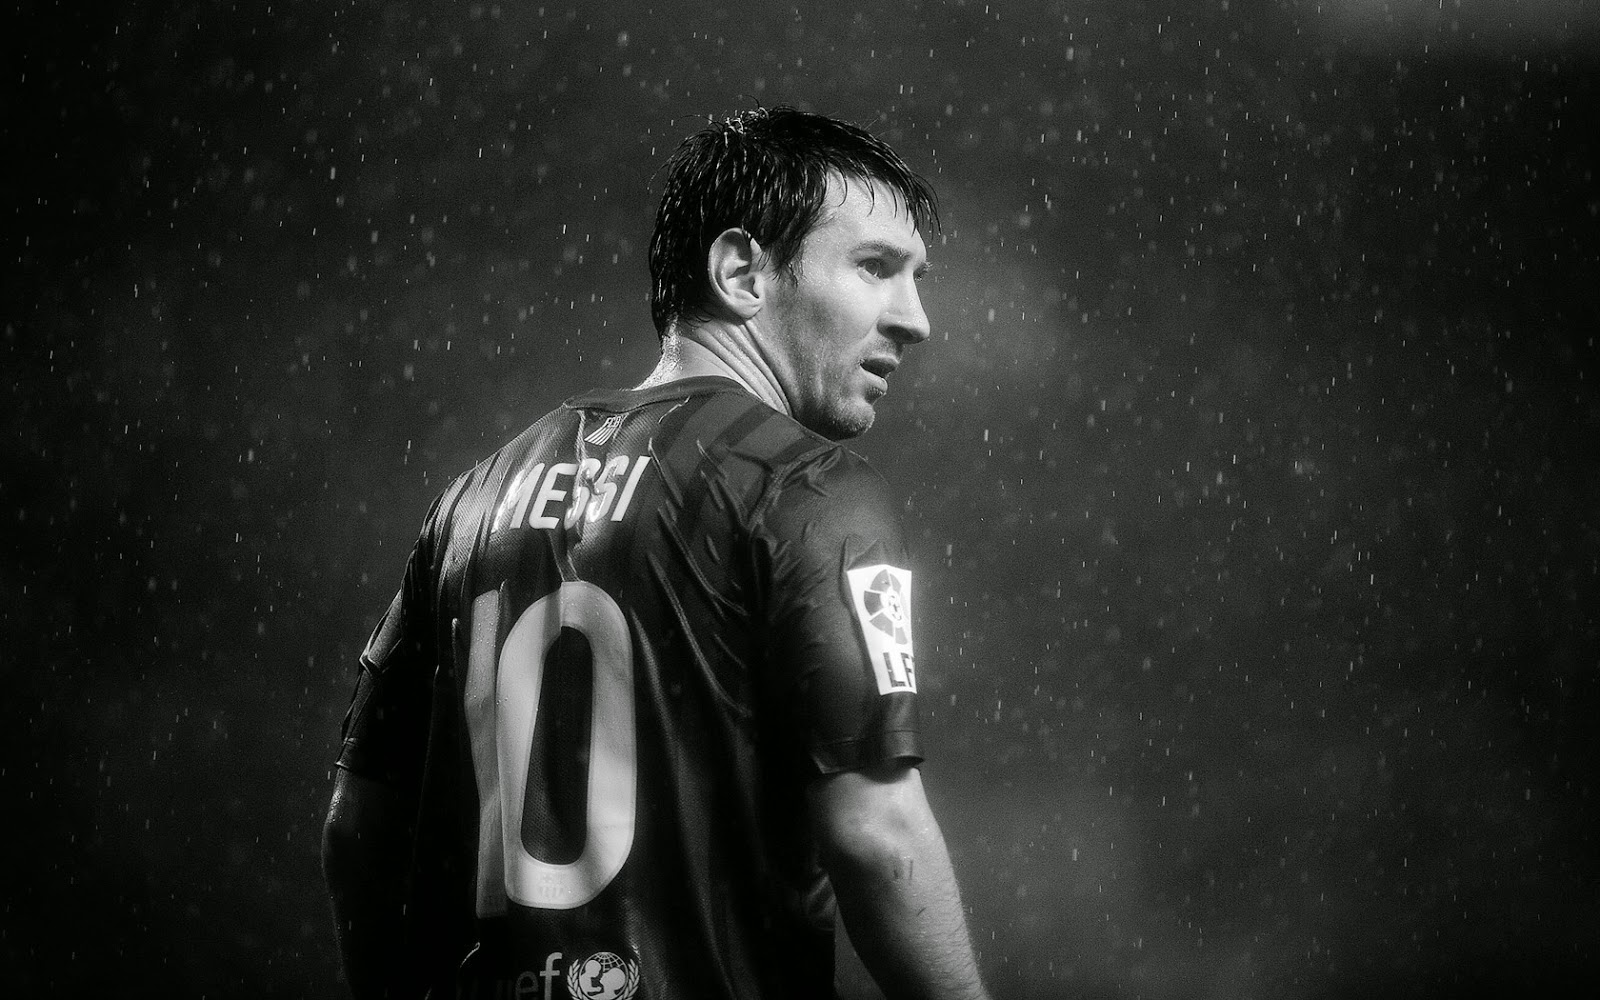 ALL SPORTS PLAYERS: Lionel Messi hd Wallpapers 2014 Fifa World Cup